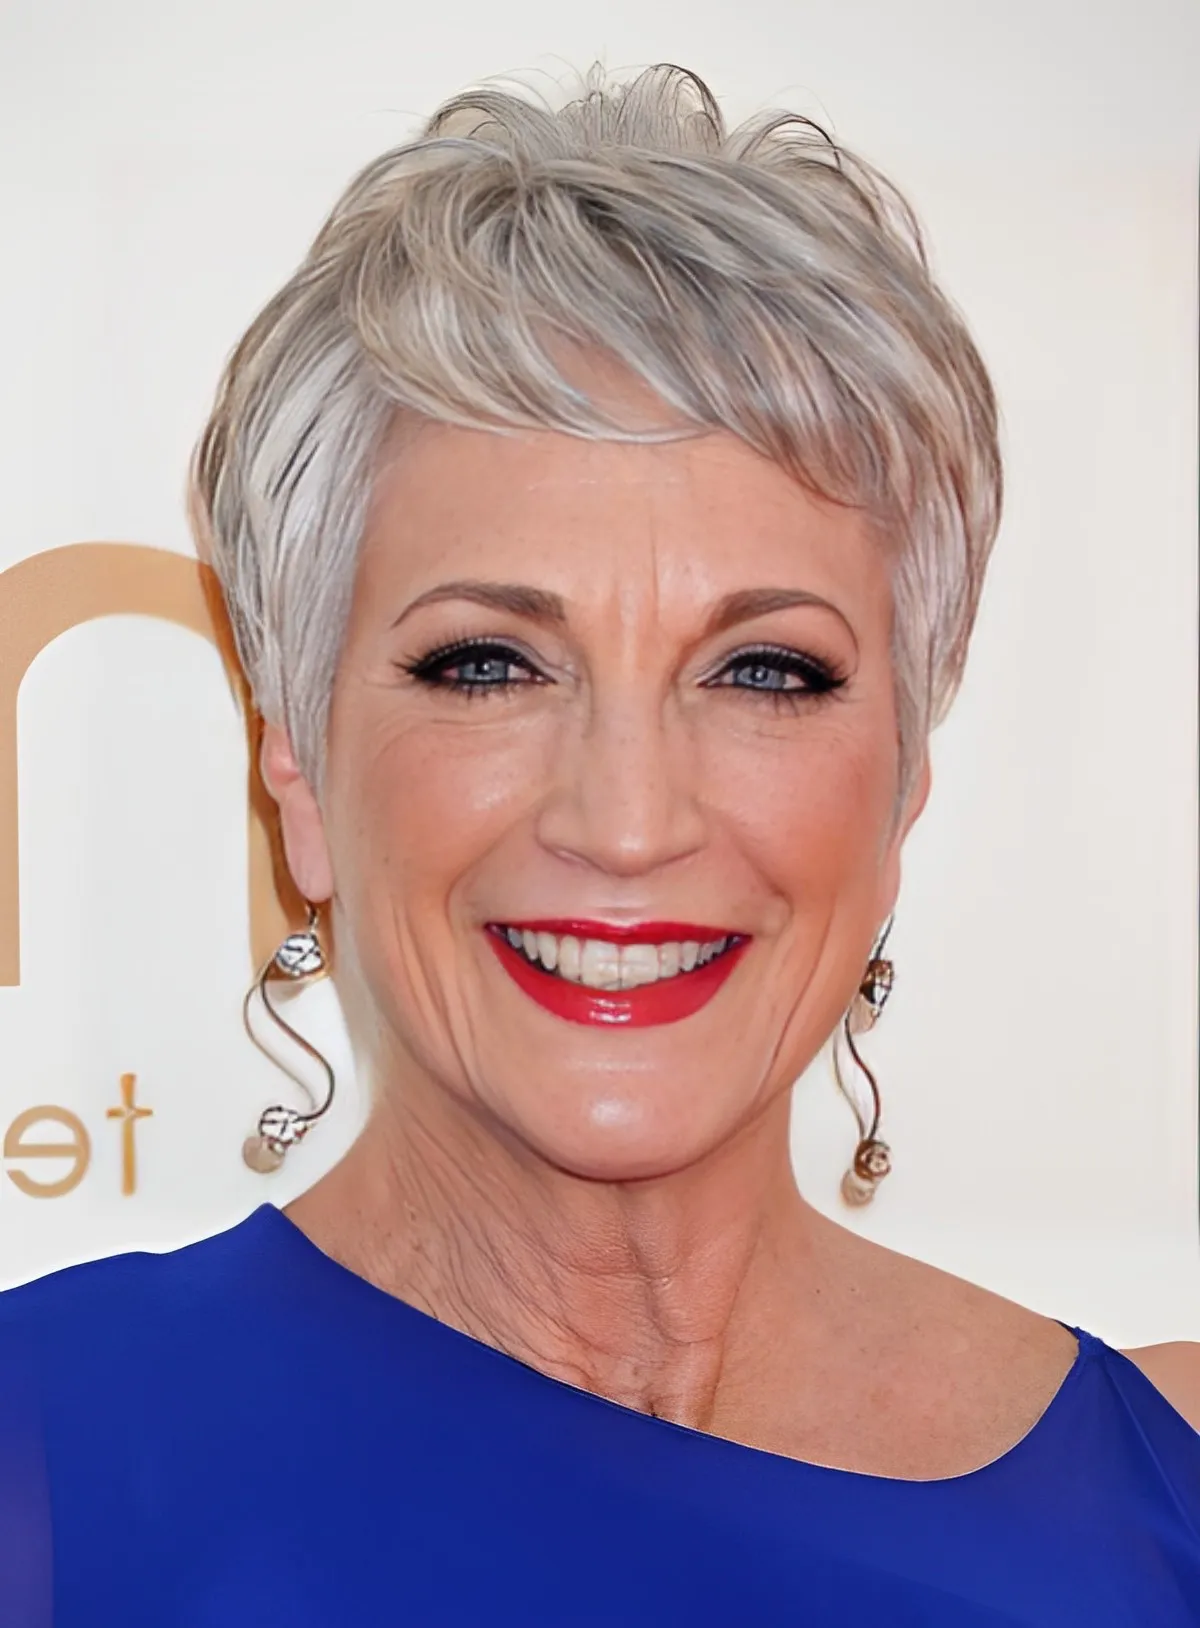 60 year old woman with short cut and pixie bangs how to adopt it